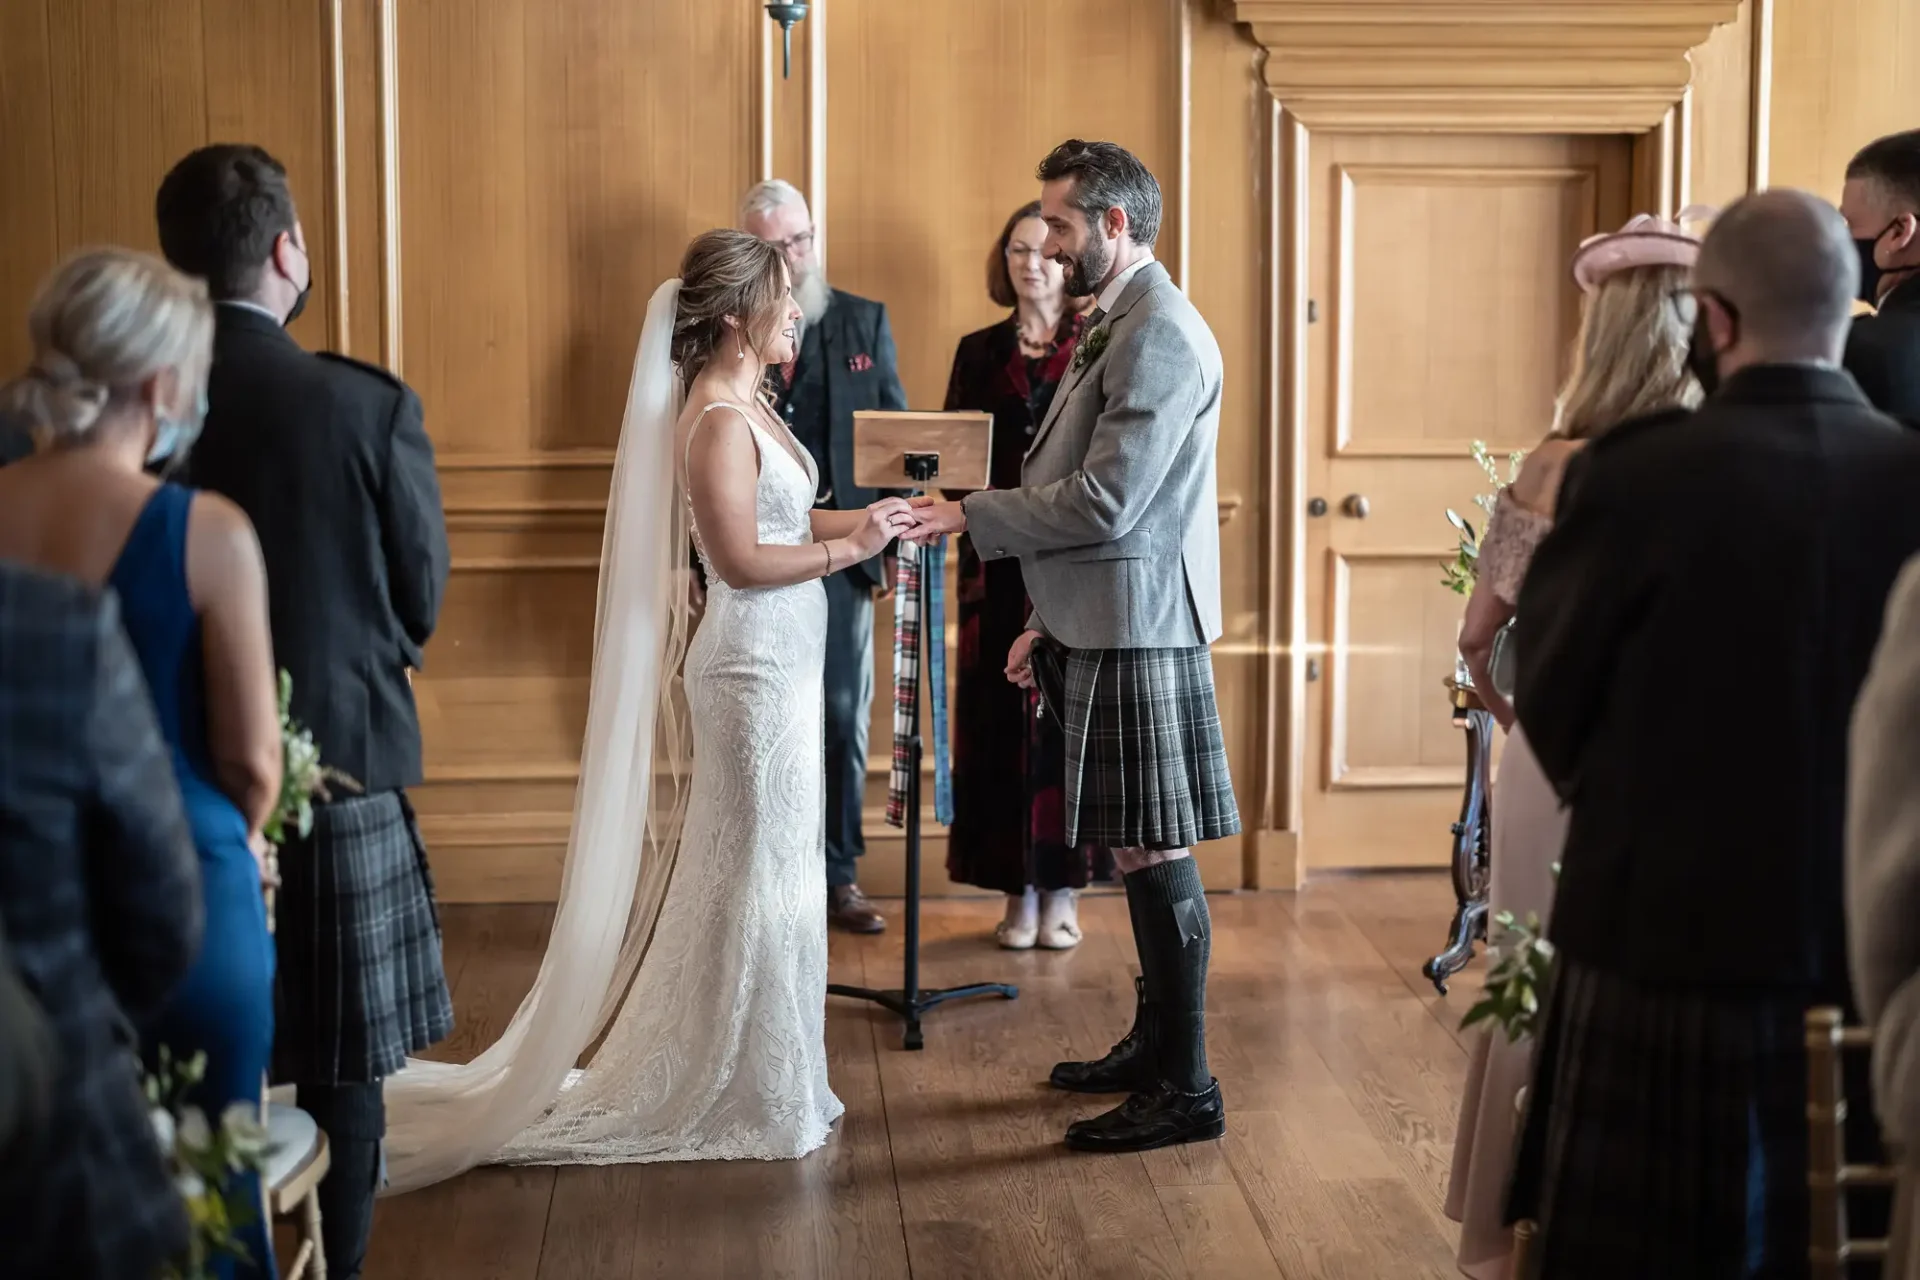 A bride in a white dress and a groom in a kilt exchanging vows in a wood-paneled room, surrounded by guests.